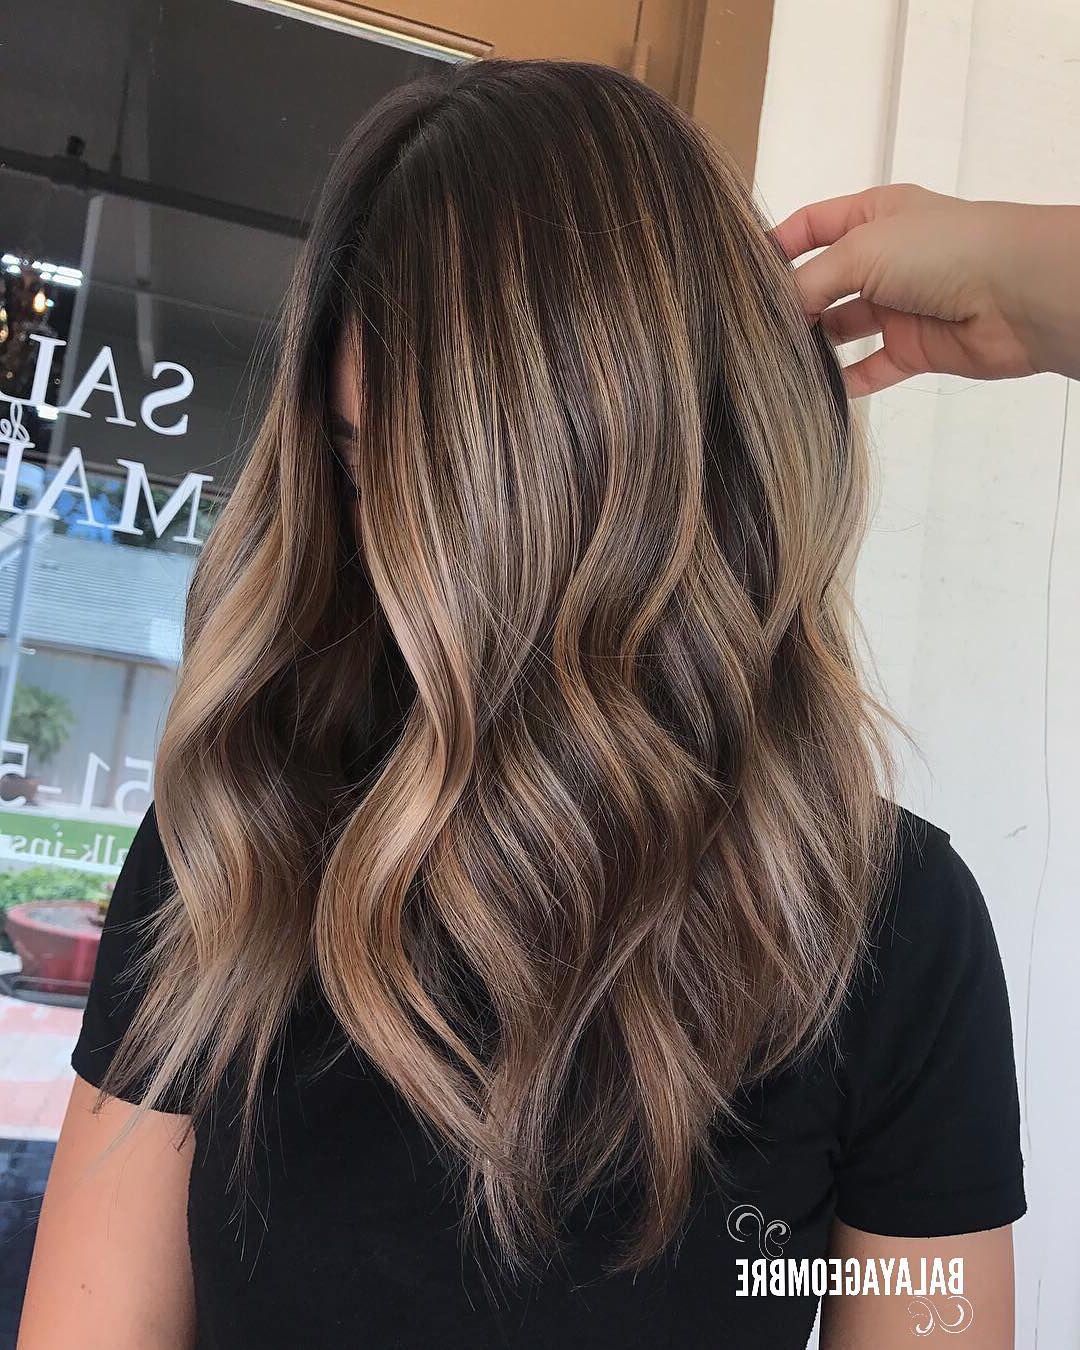 10 Best Medium Layered Hairstyles 2019 – Brown & Ash Blonde Fashion For Fashionable Brown Blonde Hair With Long Layers Hairstyles (View 5 of 20)